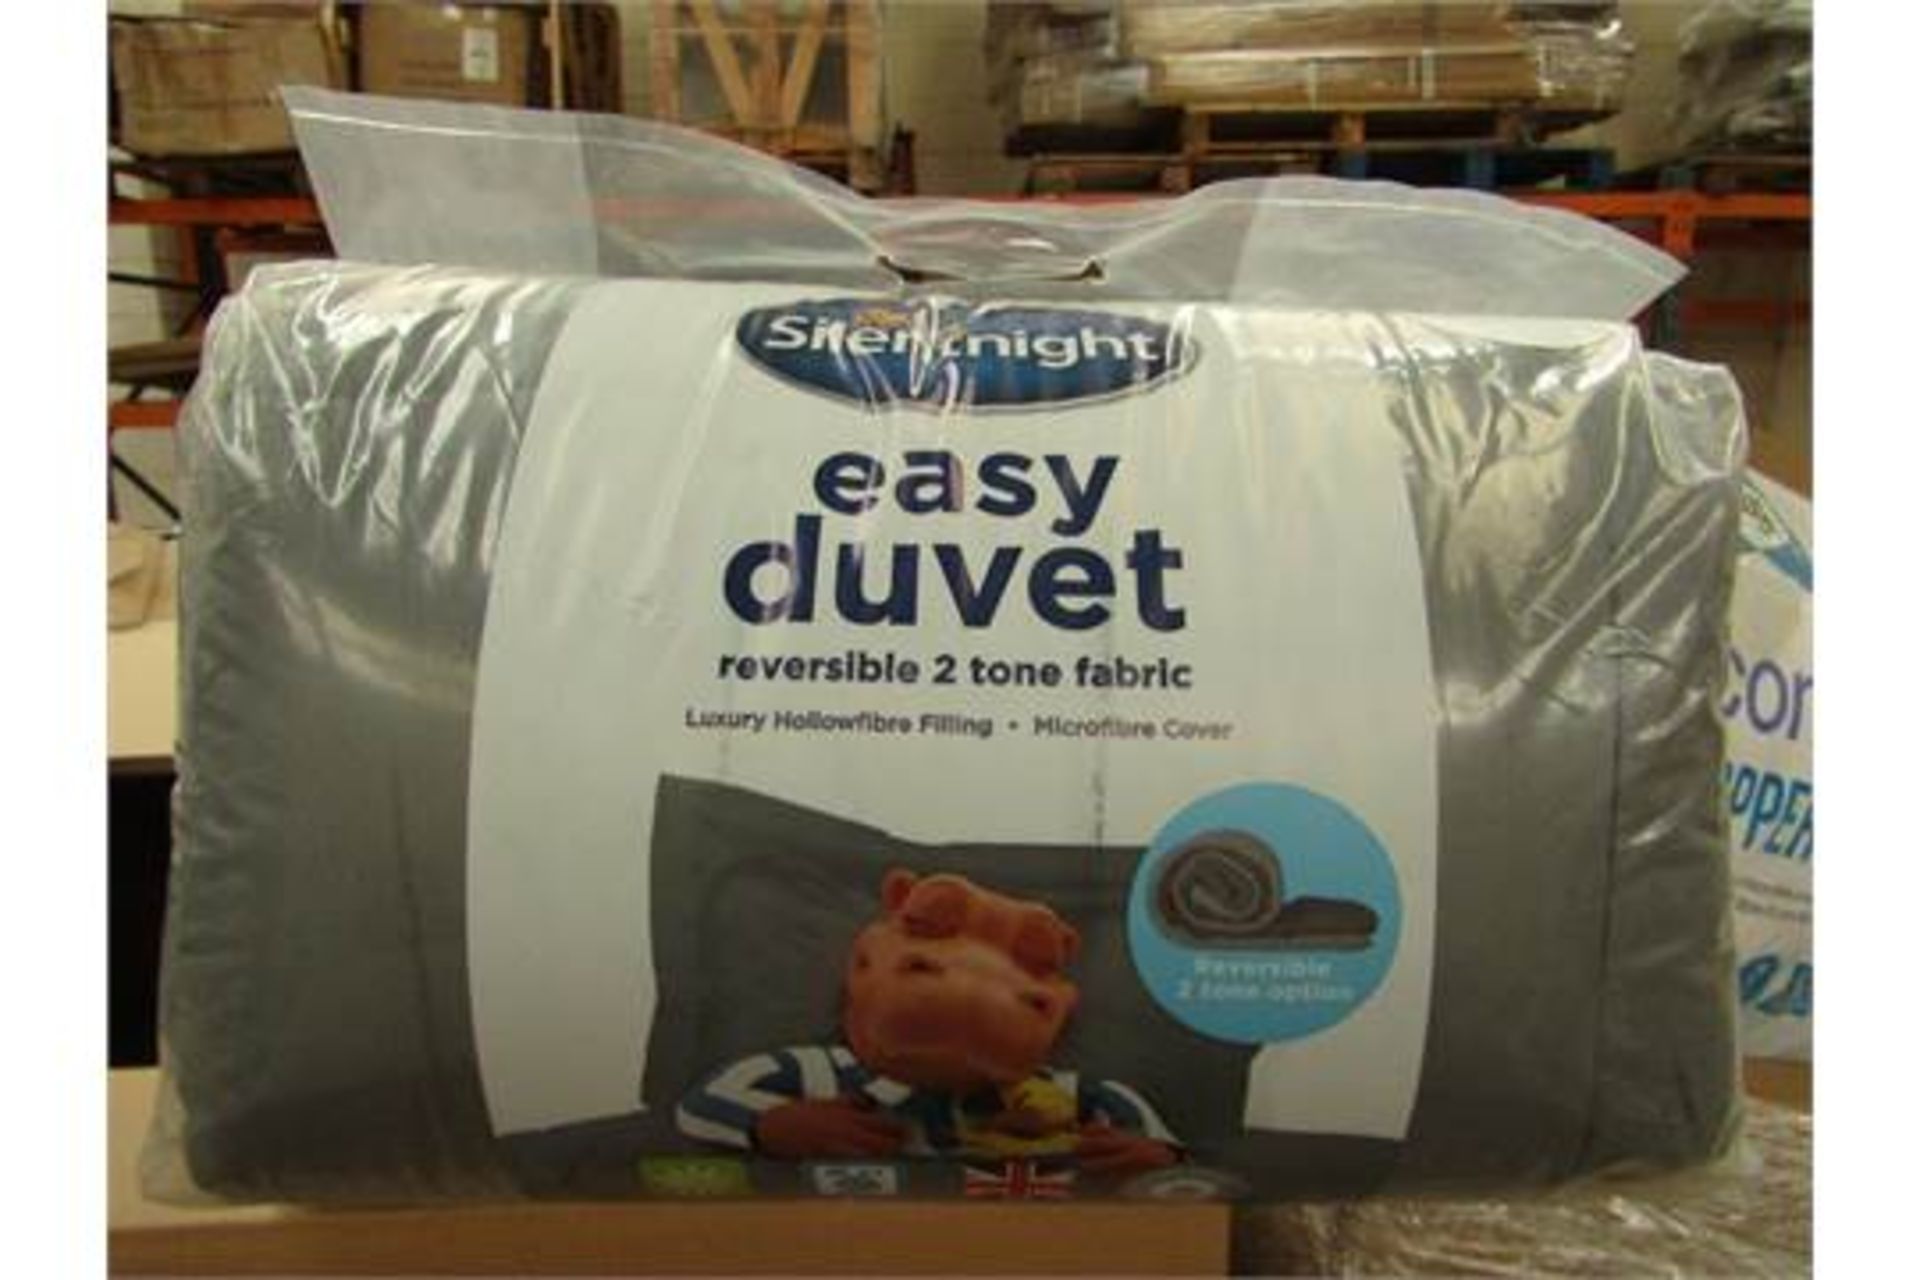 6x Silentnight easy duvets, reversible 2 tone fabric, 10.5 Tog Single size, new in packaging.